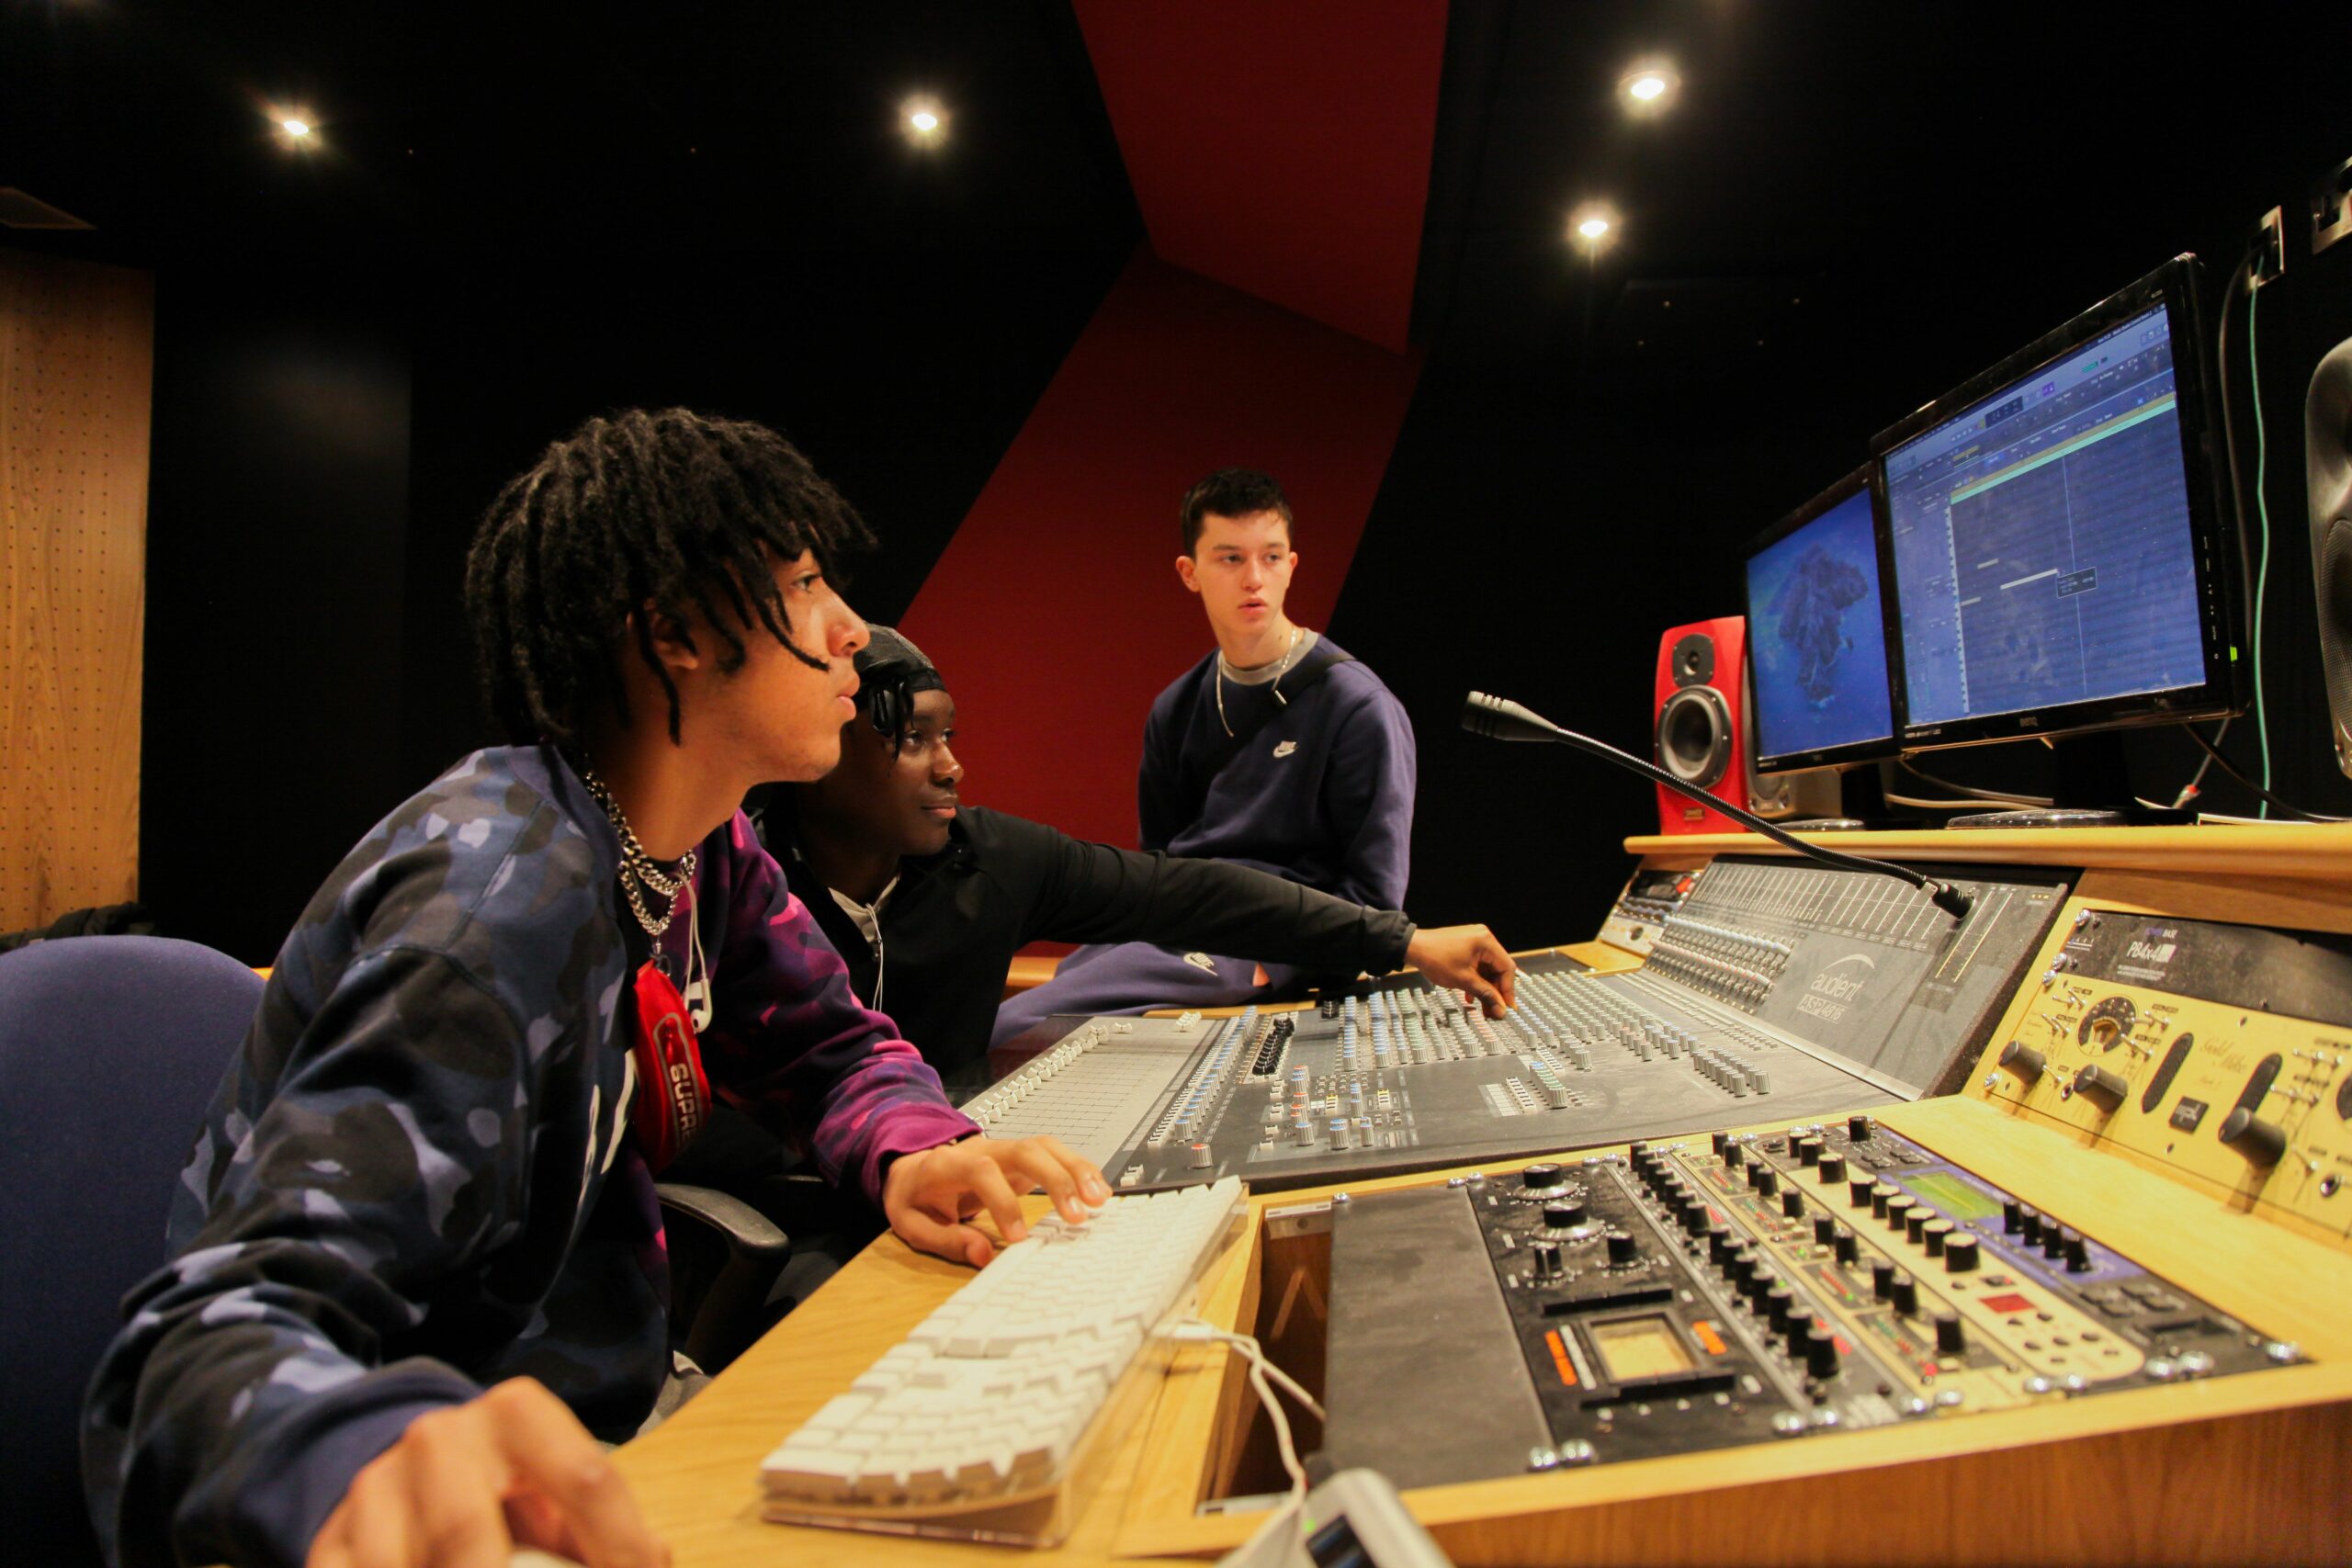 Students producing music in the production room, mixing the levels